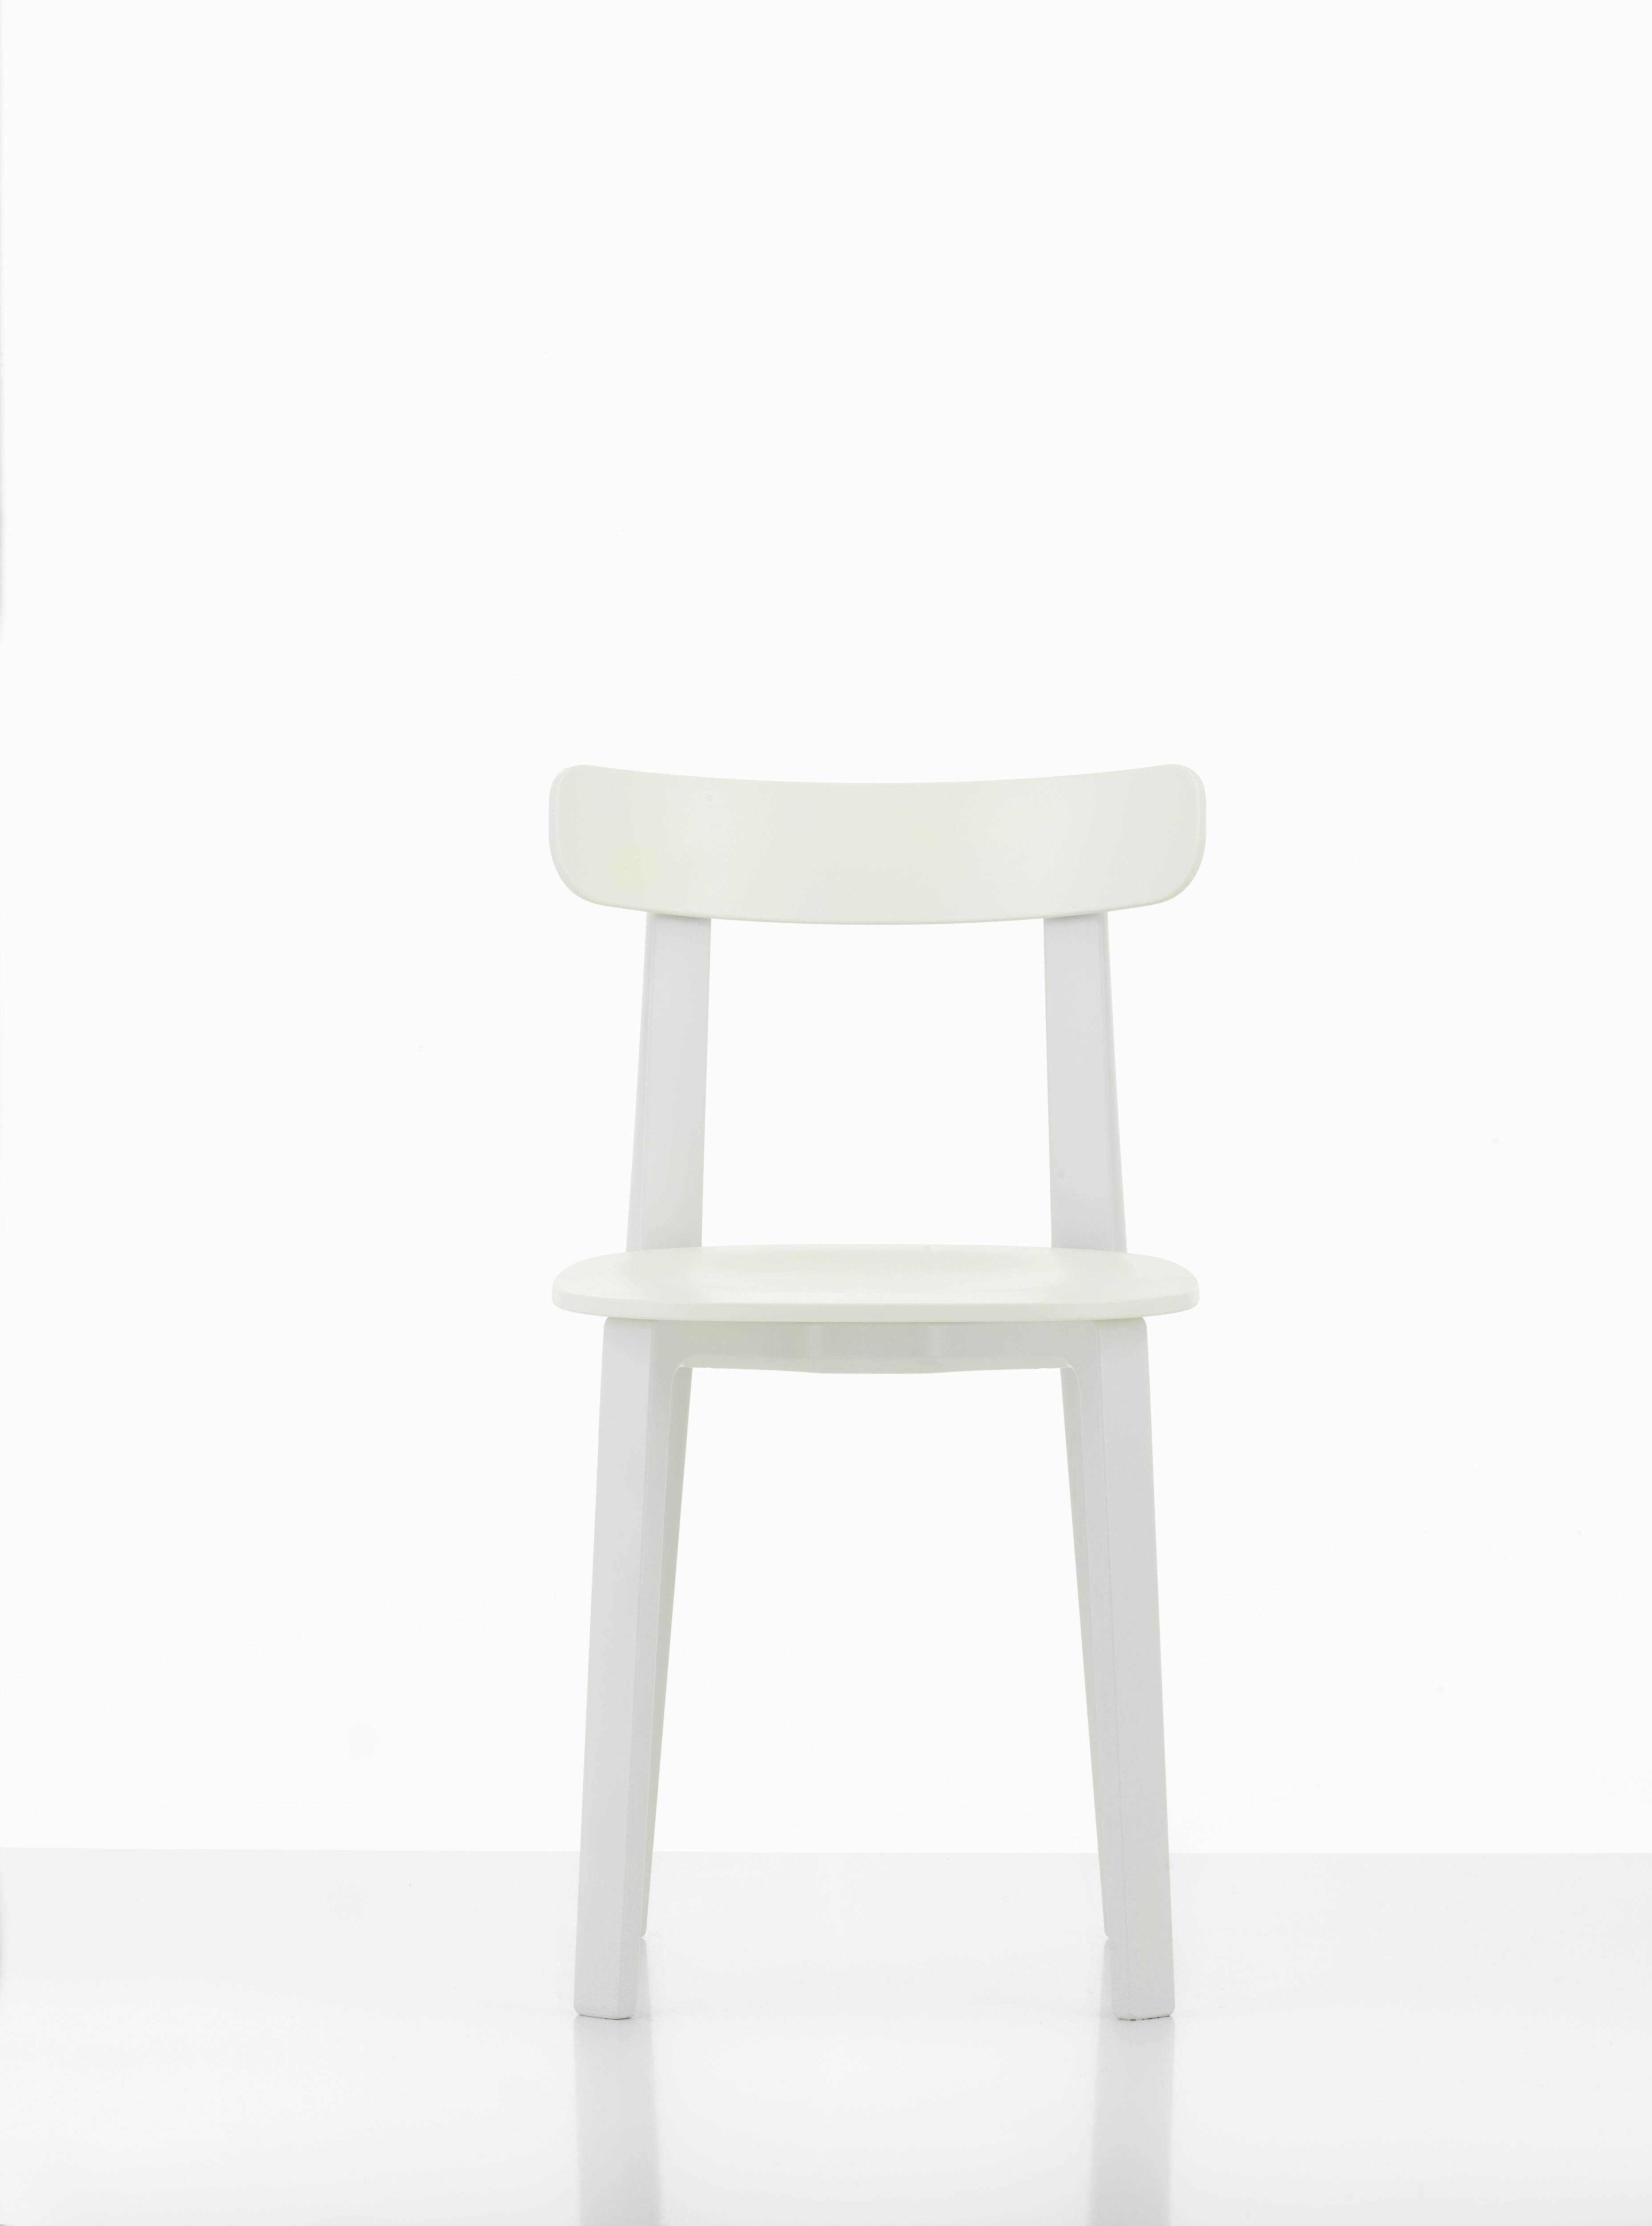 These products are only available in the United States.

 At first glance, the all plastic chair is reminiscent of the simple, Classic wooden chairs that have been familiar in Europe for many decades. Utilizing a new material, the chair represents a